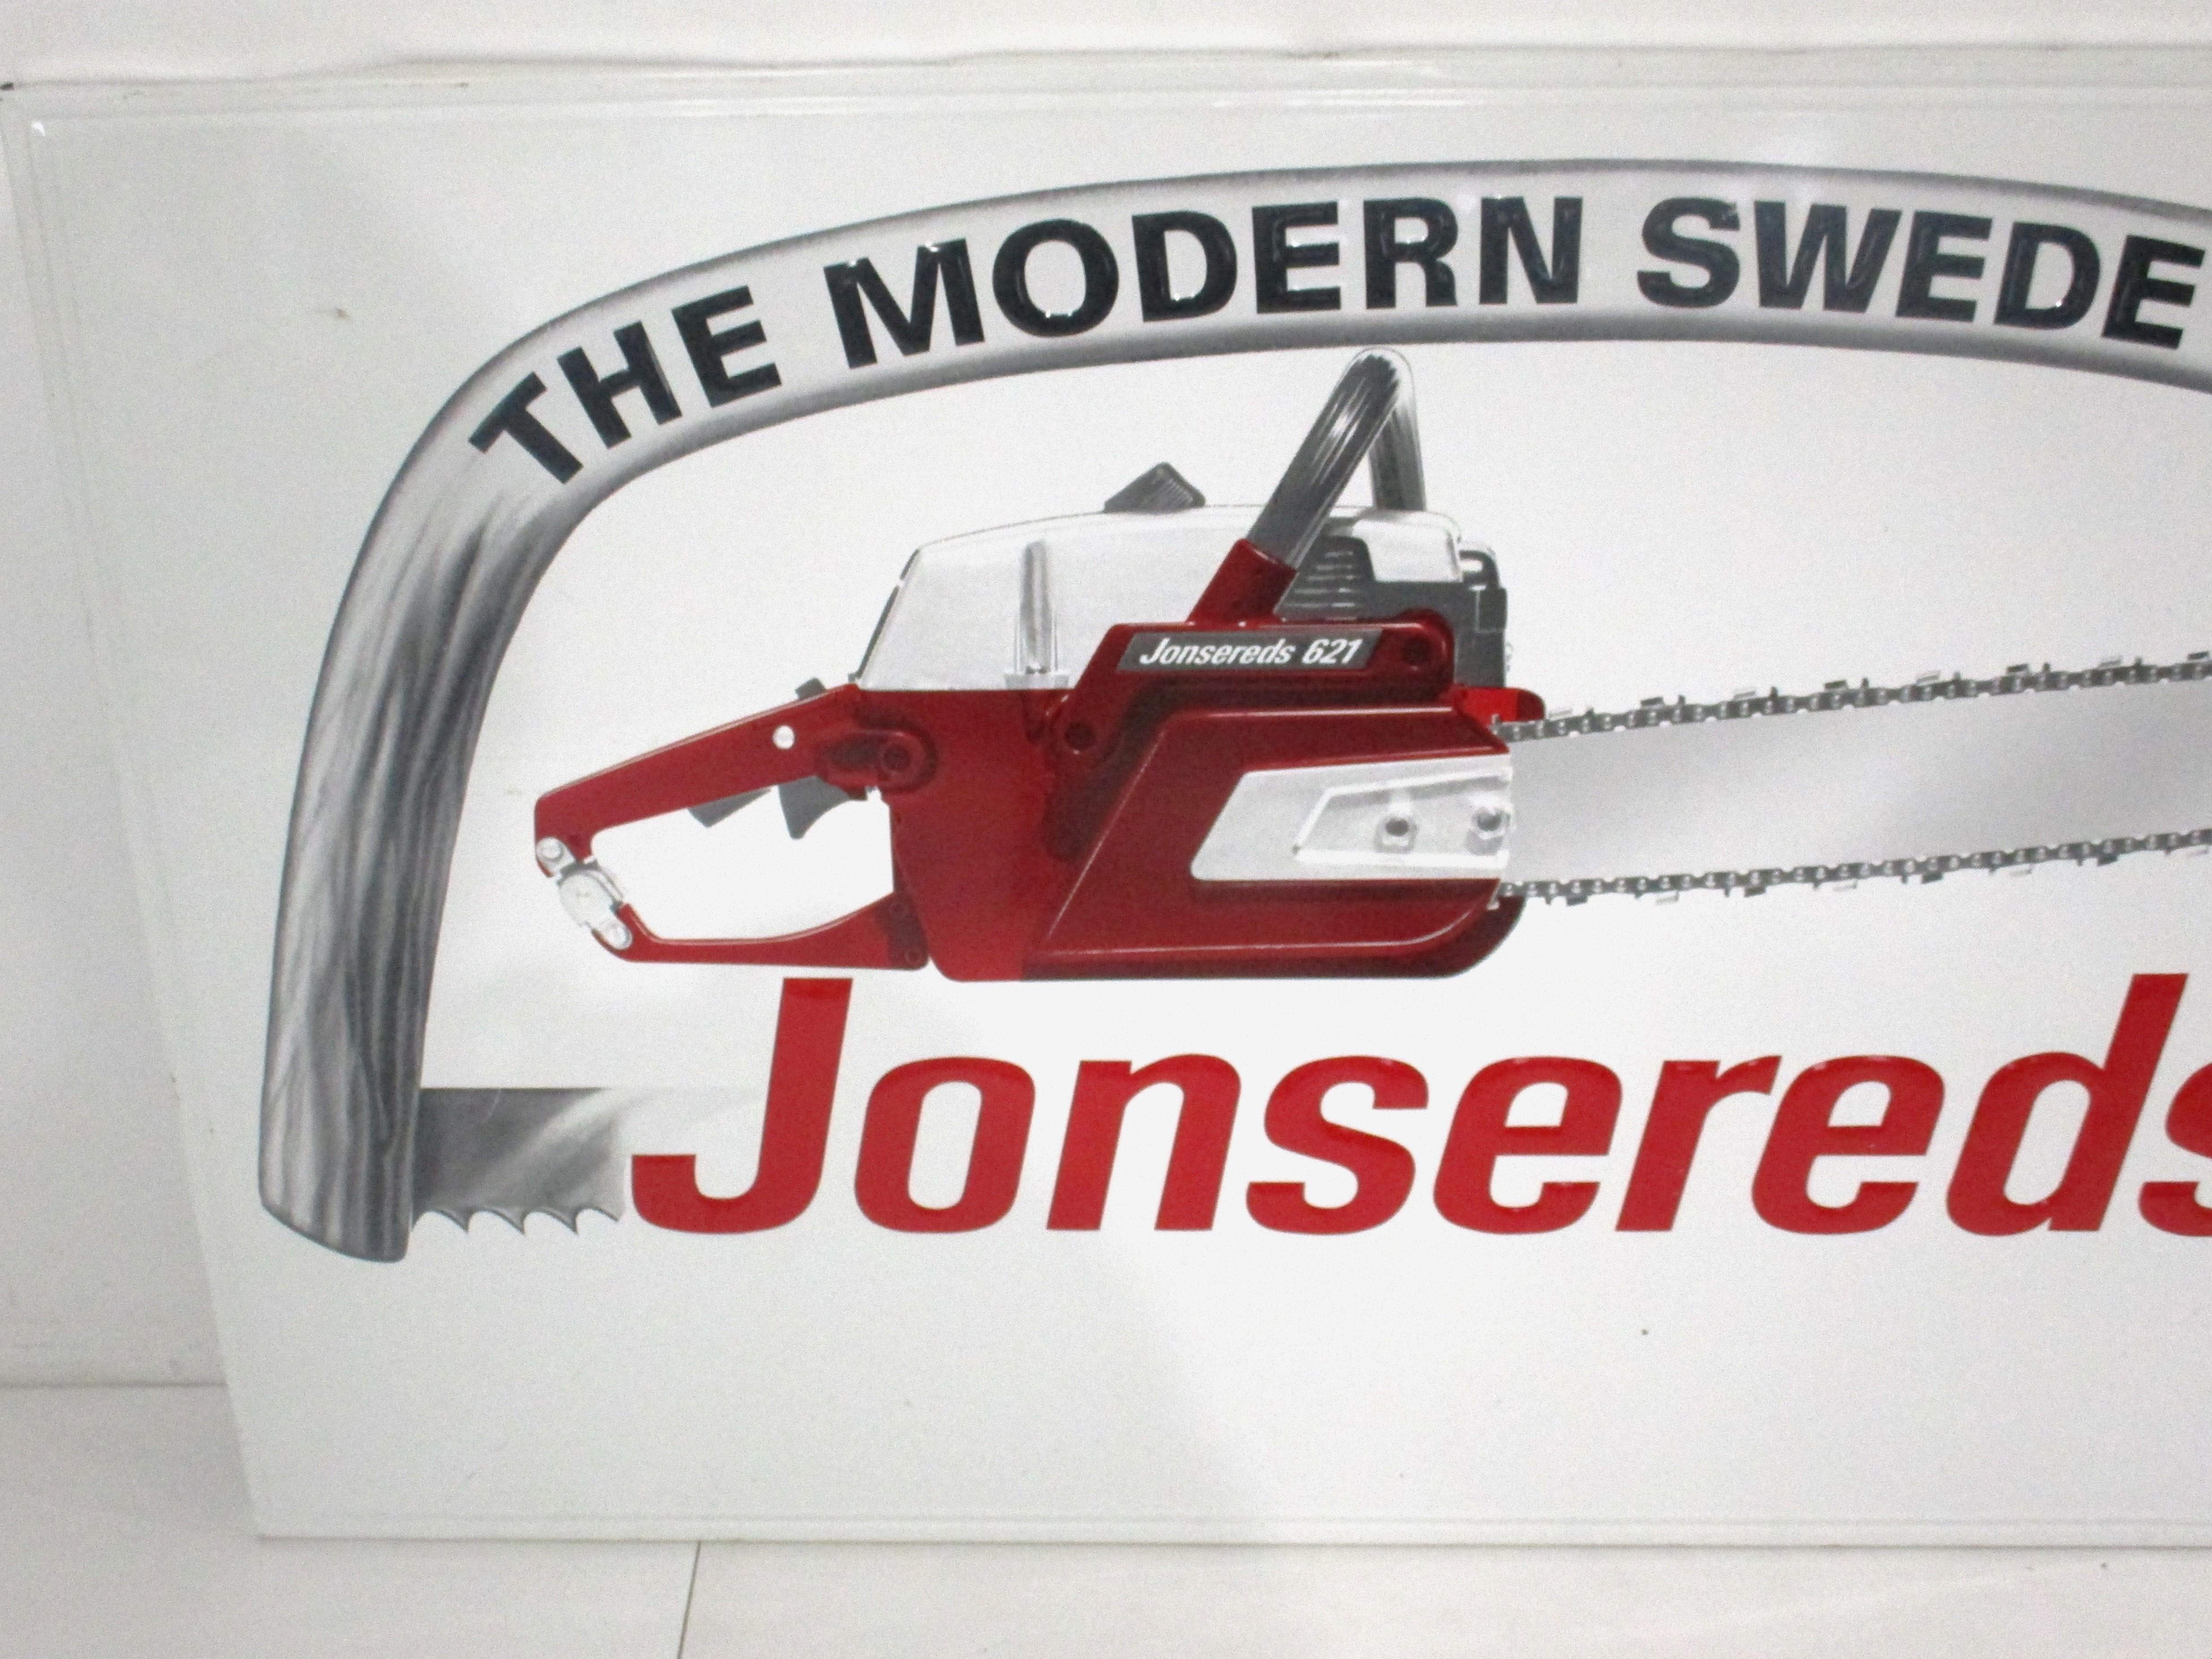 A large embossed and printed metal advertising sign for the Jonsereds chain saw company . The company makers of the traditional Swedish styled hand saw as depicted on the sign shown with their newest chain saw model number 621 titled 